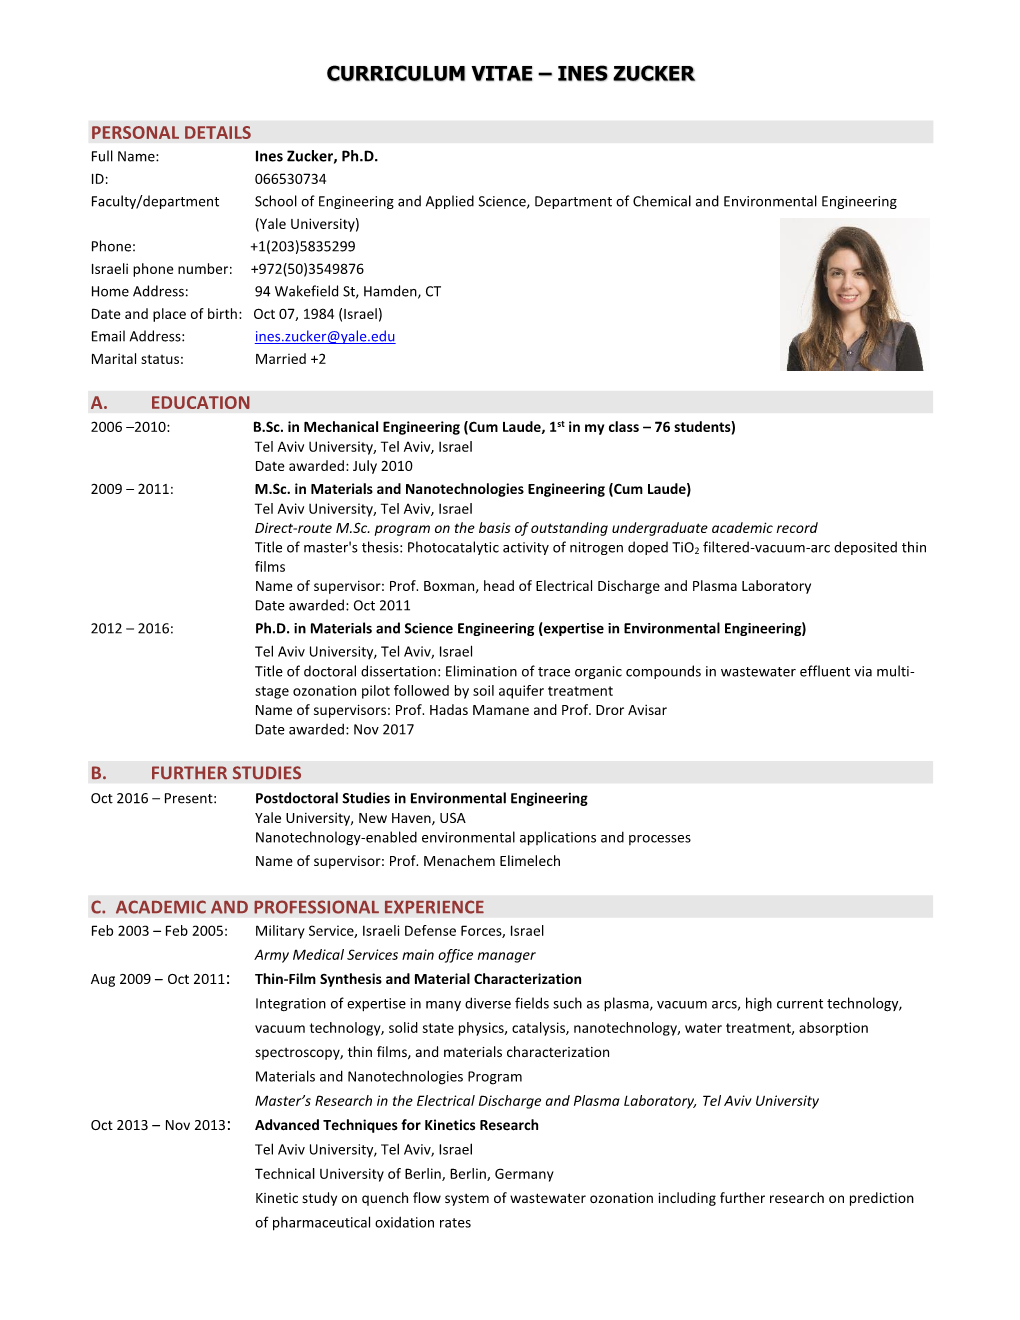 Curriculum Vitae – Ines Zucker Personal Details A. Education B. Further Studies C. Academic and Professional Experience